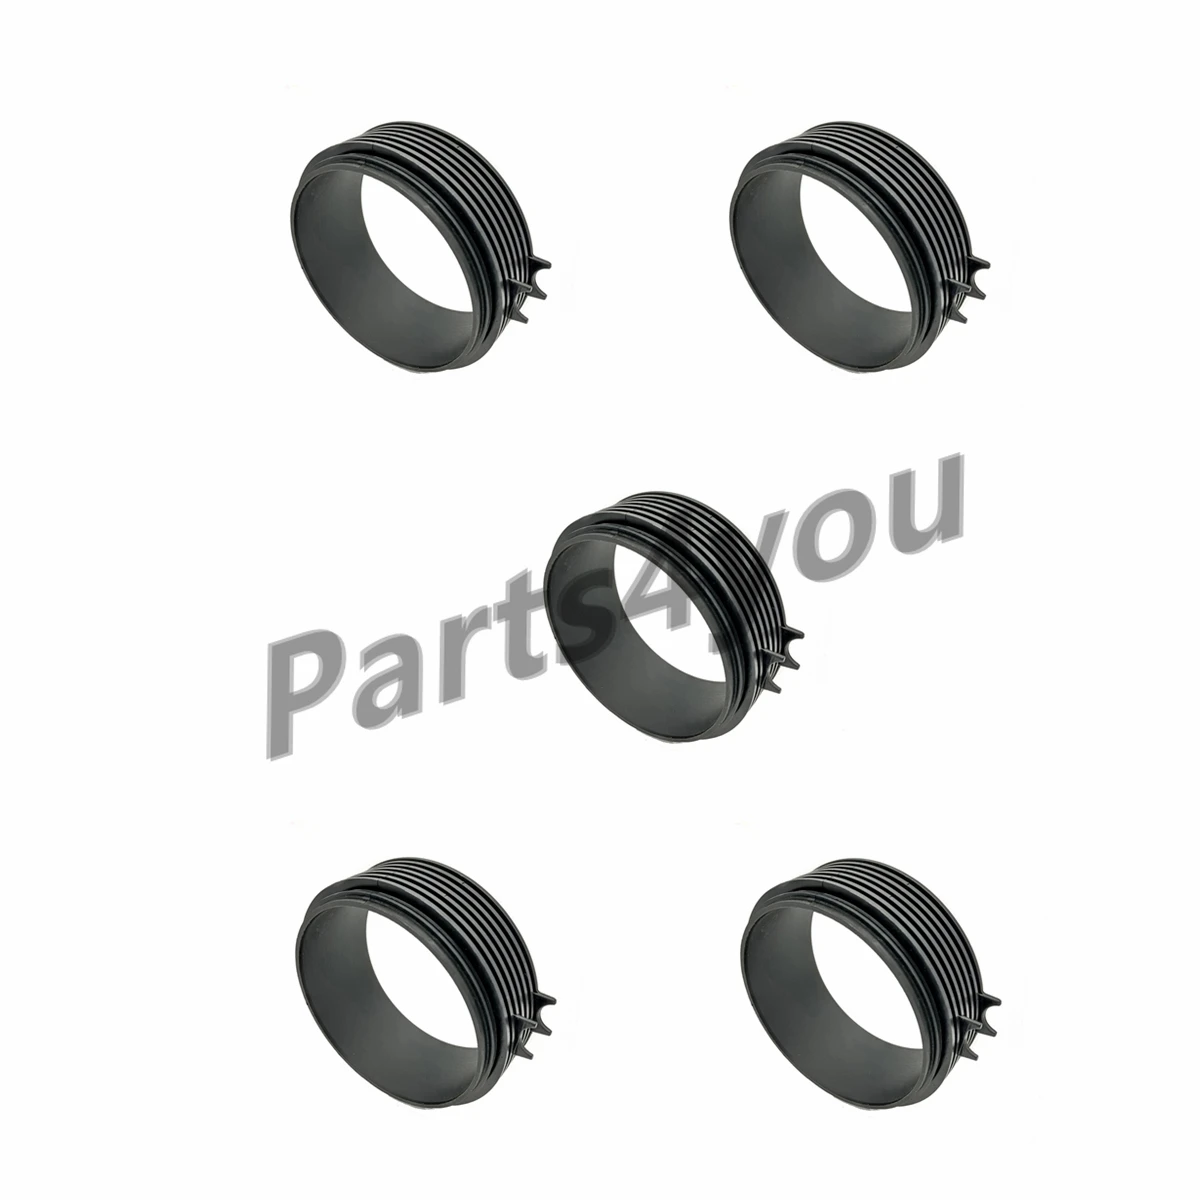 5PCS SeaDoo SEA-DOO SPARK IMPELLER WEAR RING Spark Wear Ring 2-Up 3-Up 900 Ho Ace 267000617 267000925 267000813 Watercraft